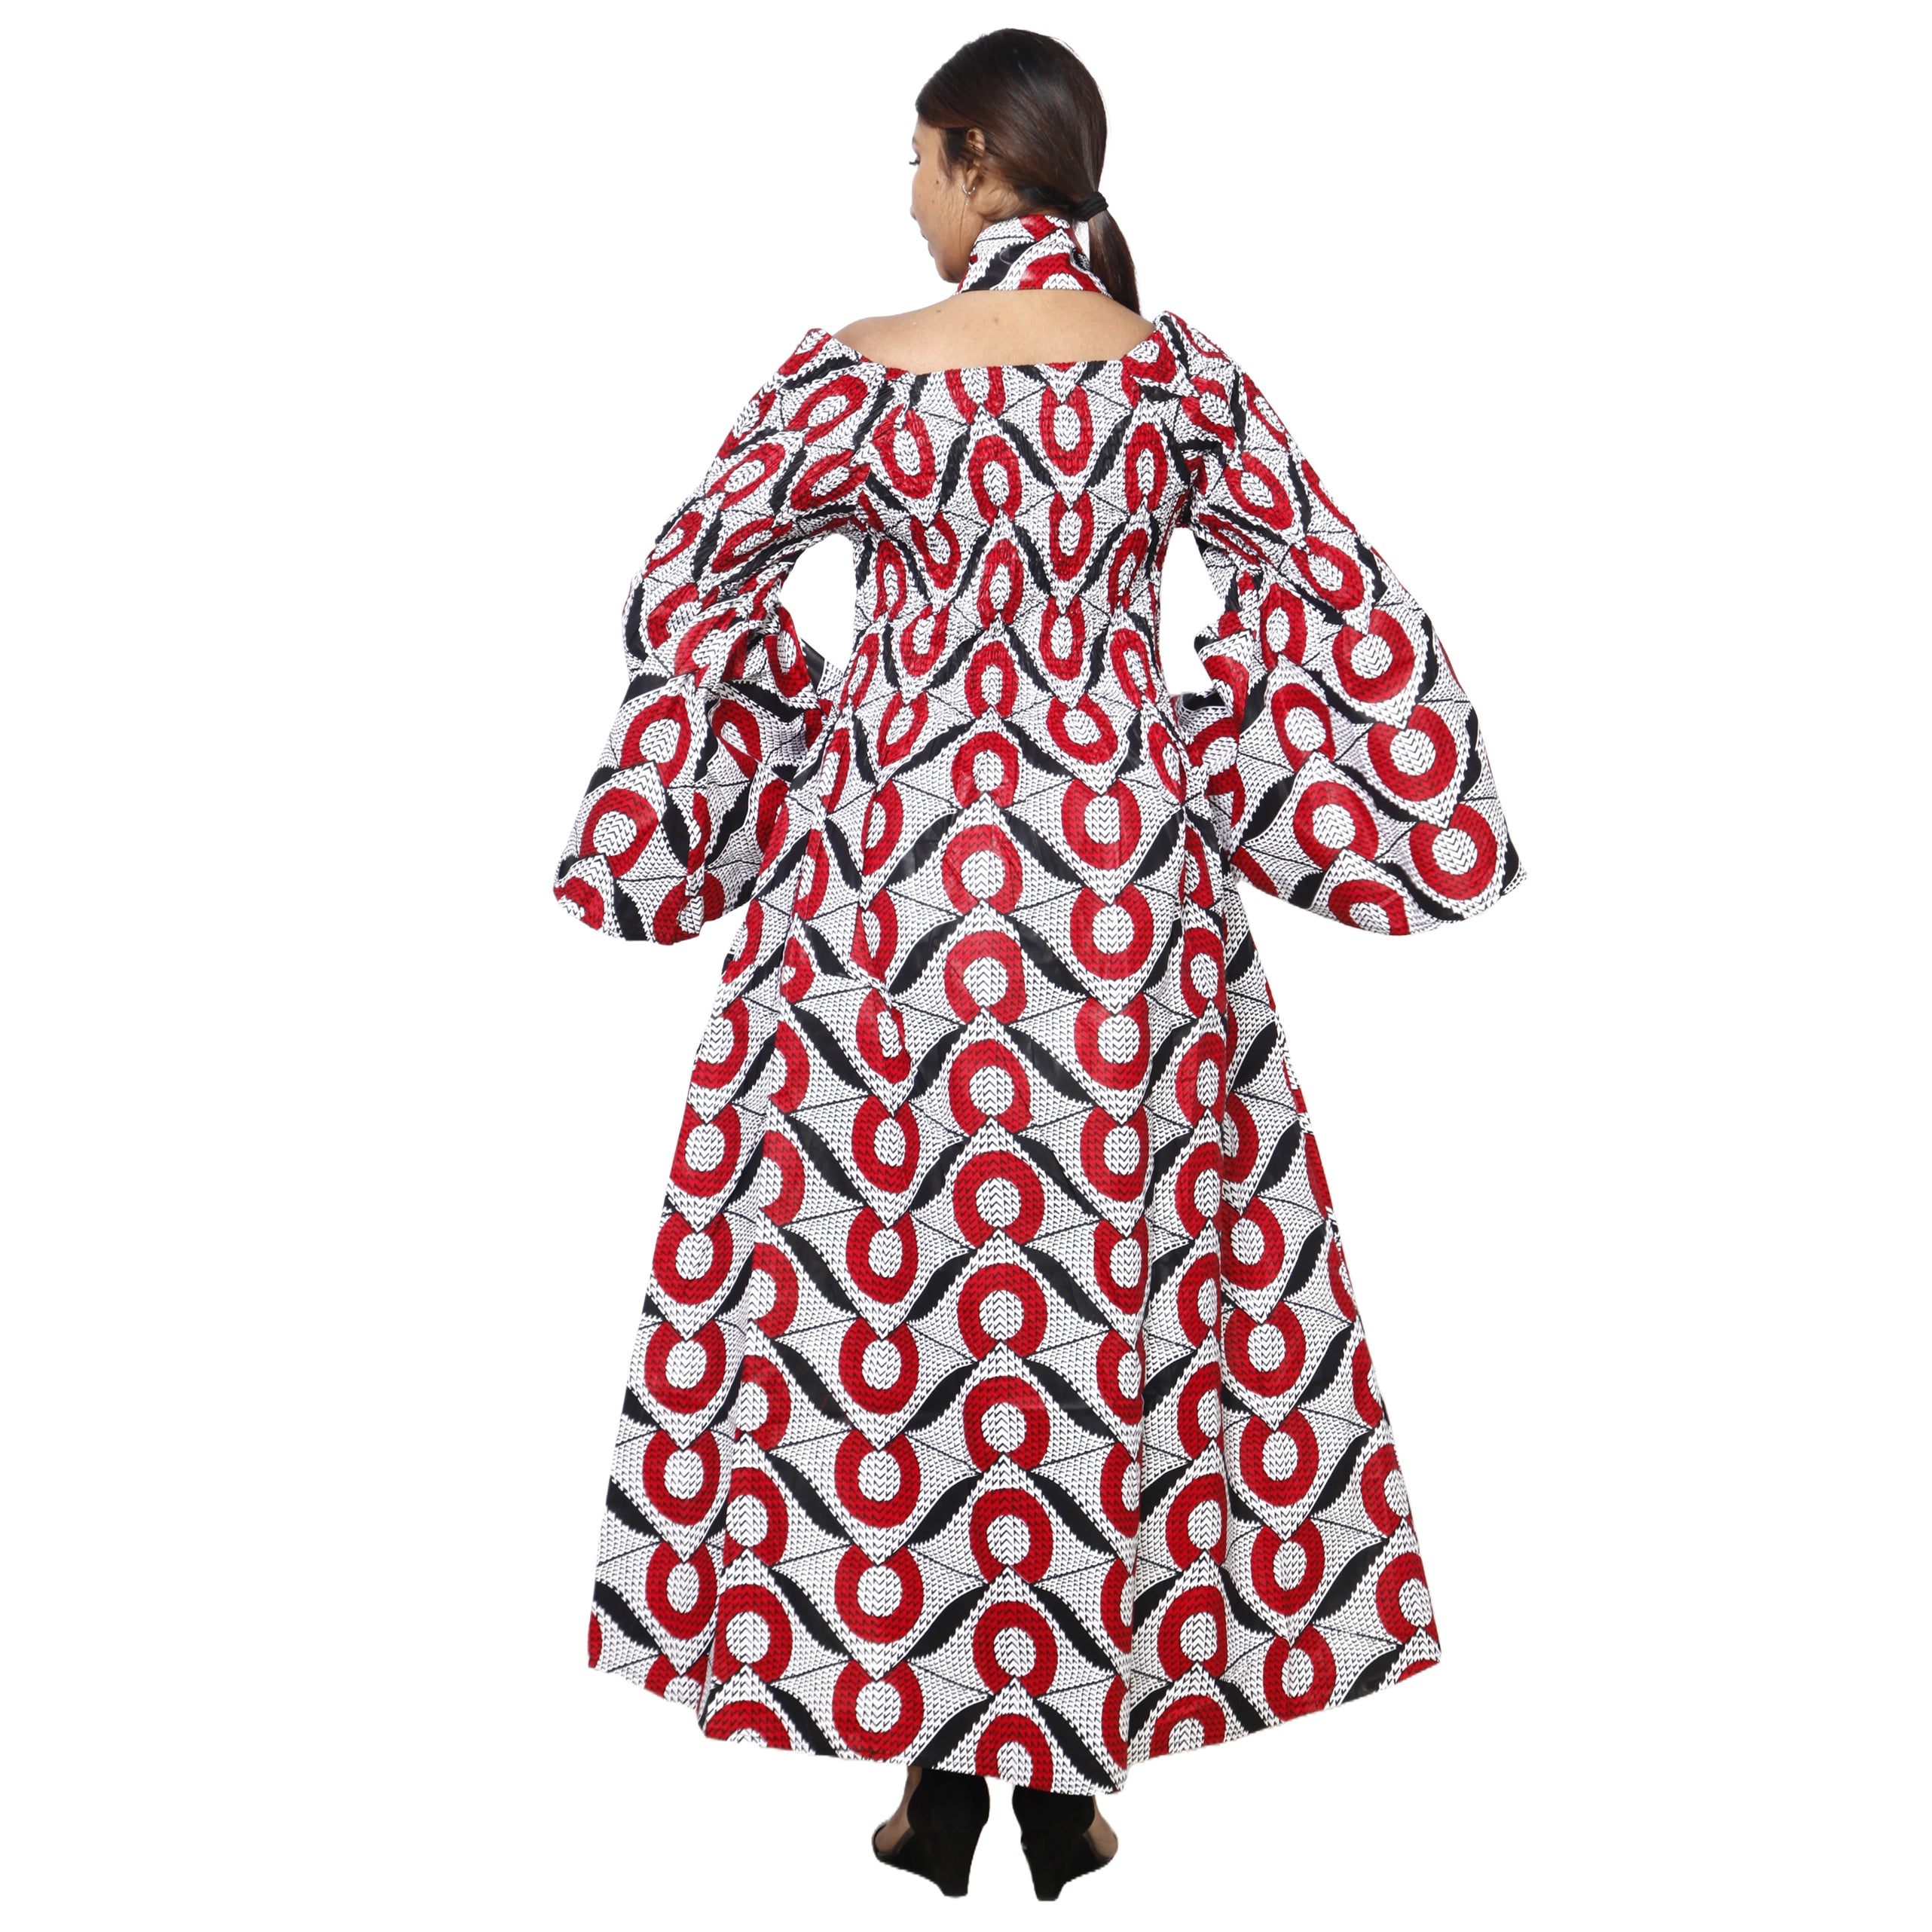 Women's Long Sleeve Smocking Maxi Dress with Bell Sleeves -- FI-50072